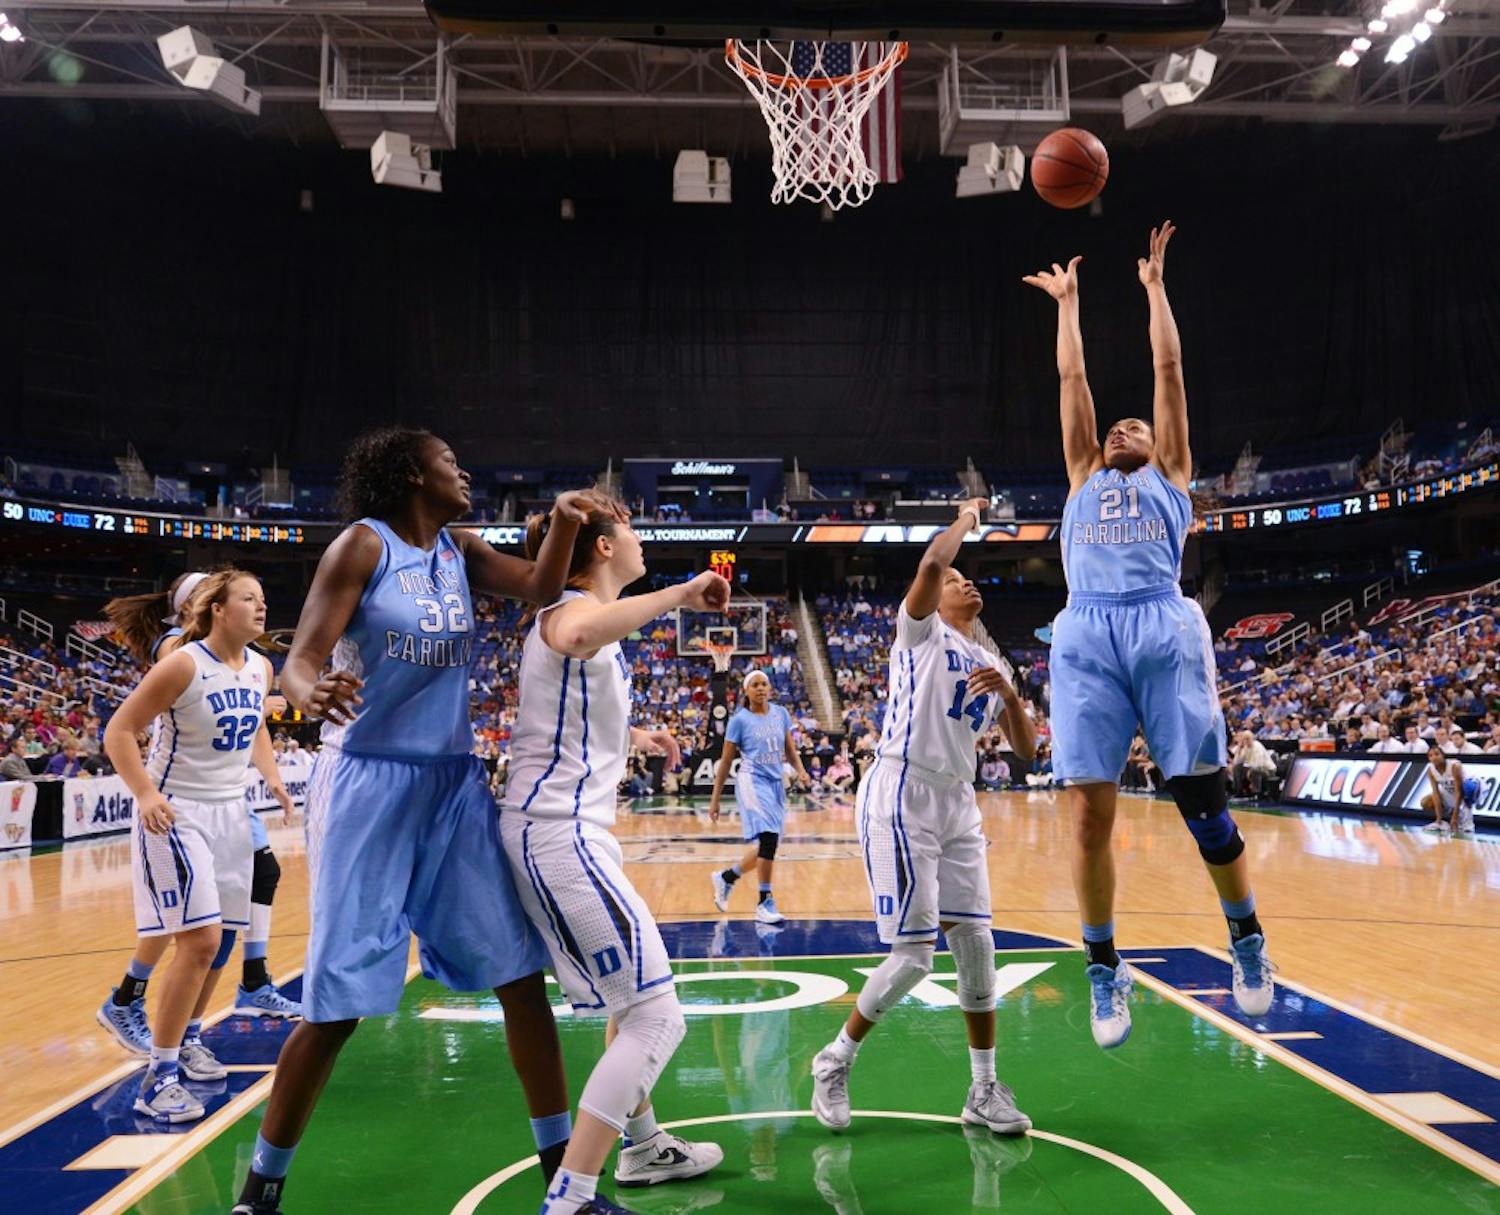 	Krista Gross, 21, takes a shot against Duke in the ACC Tournament championship game. Gross scored eight points in UNC’s 92-73 loss.